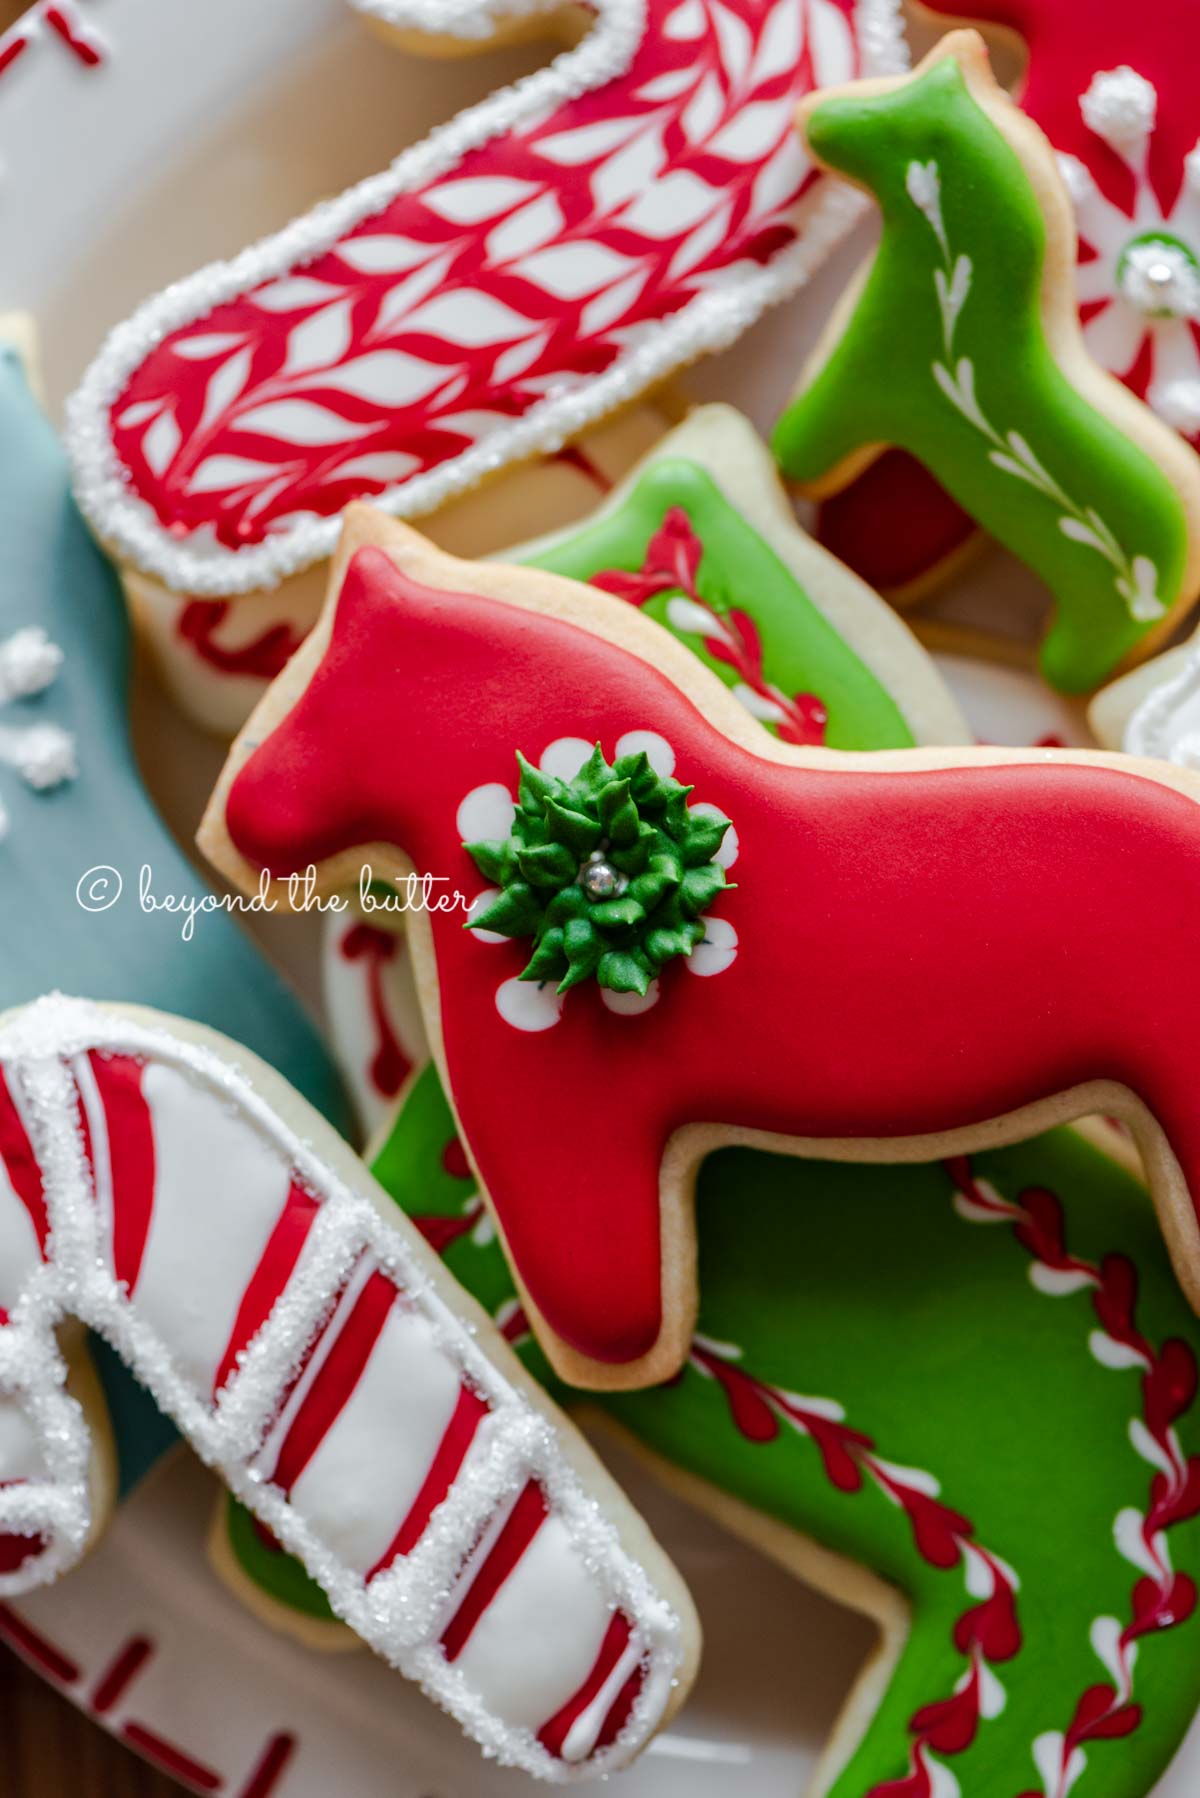 Closeup of holiday themed cut out sugar cookies on a red and white dessert plate.